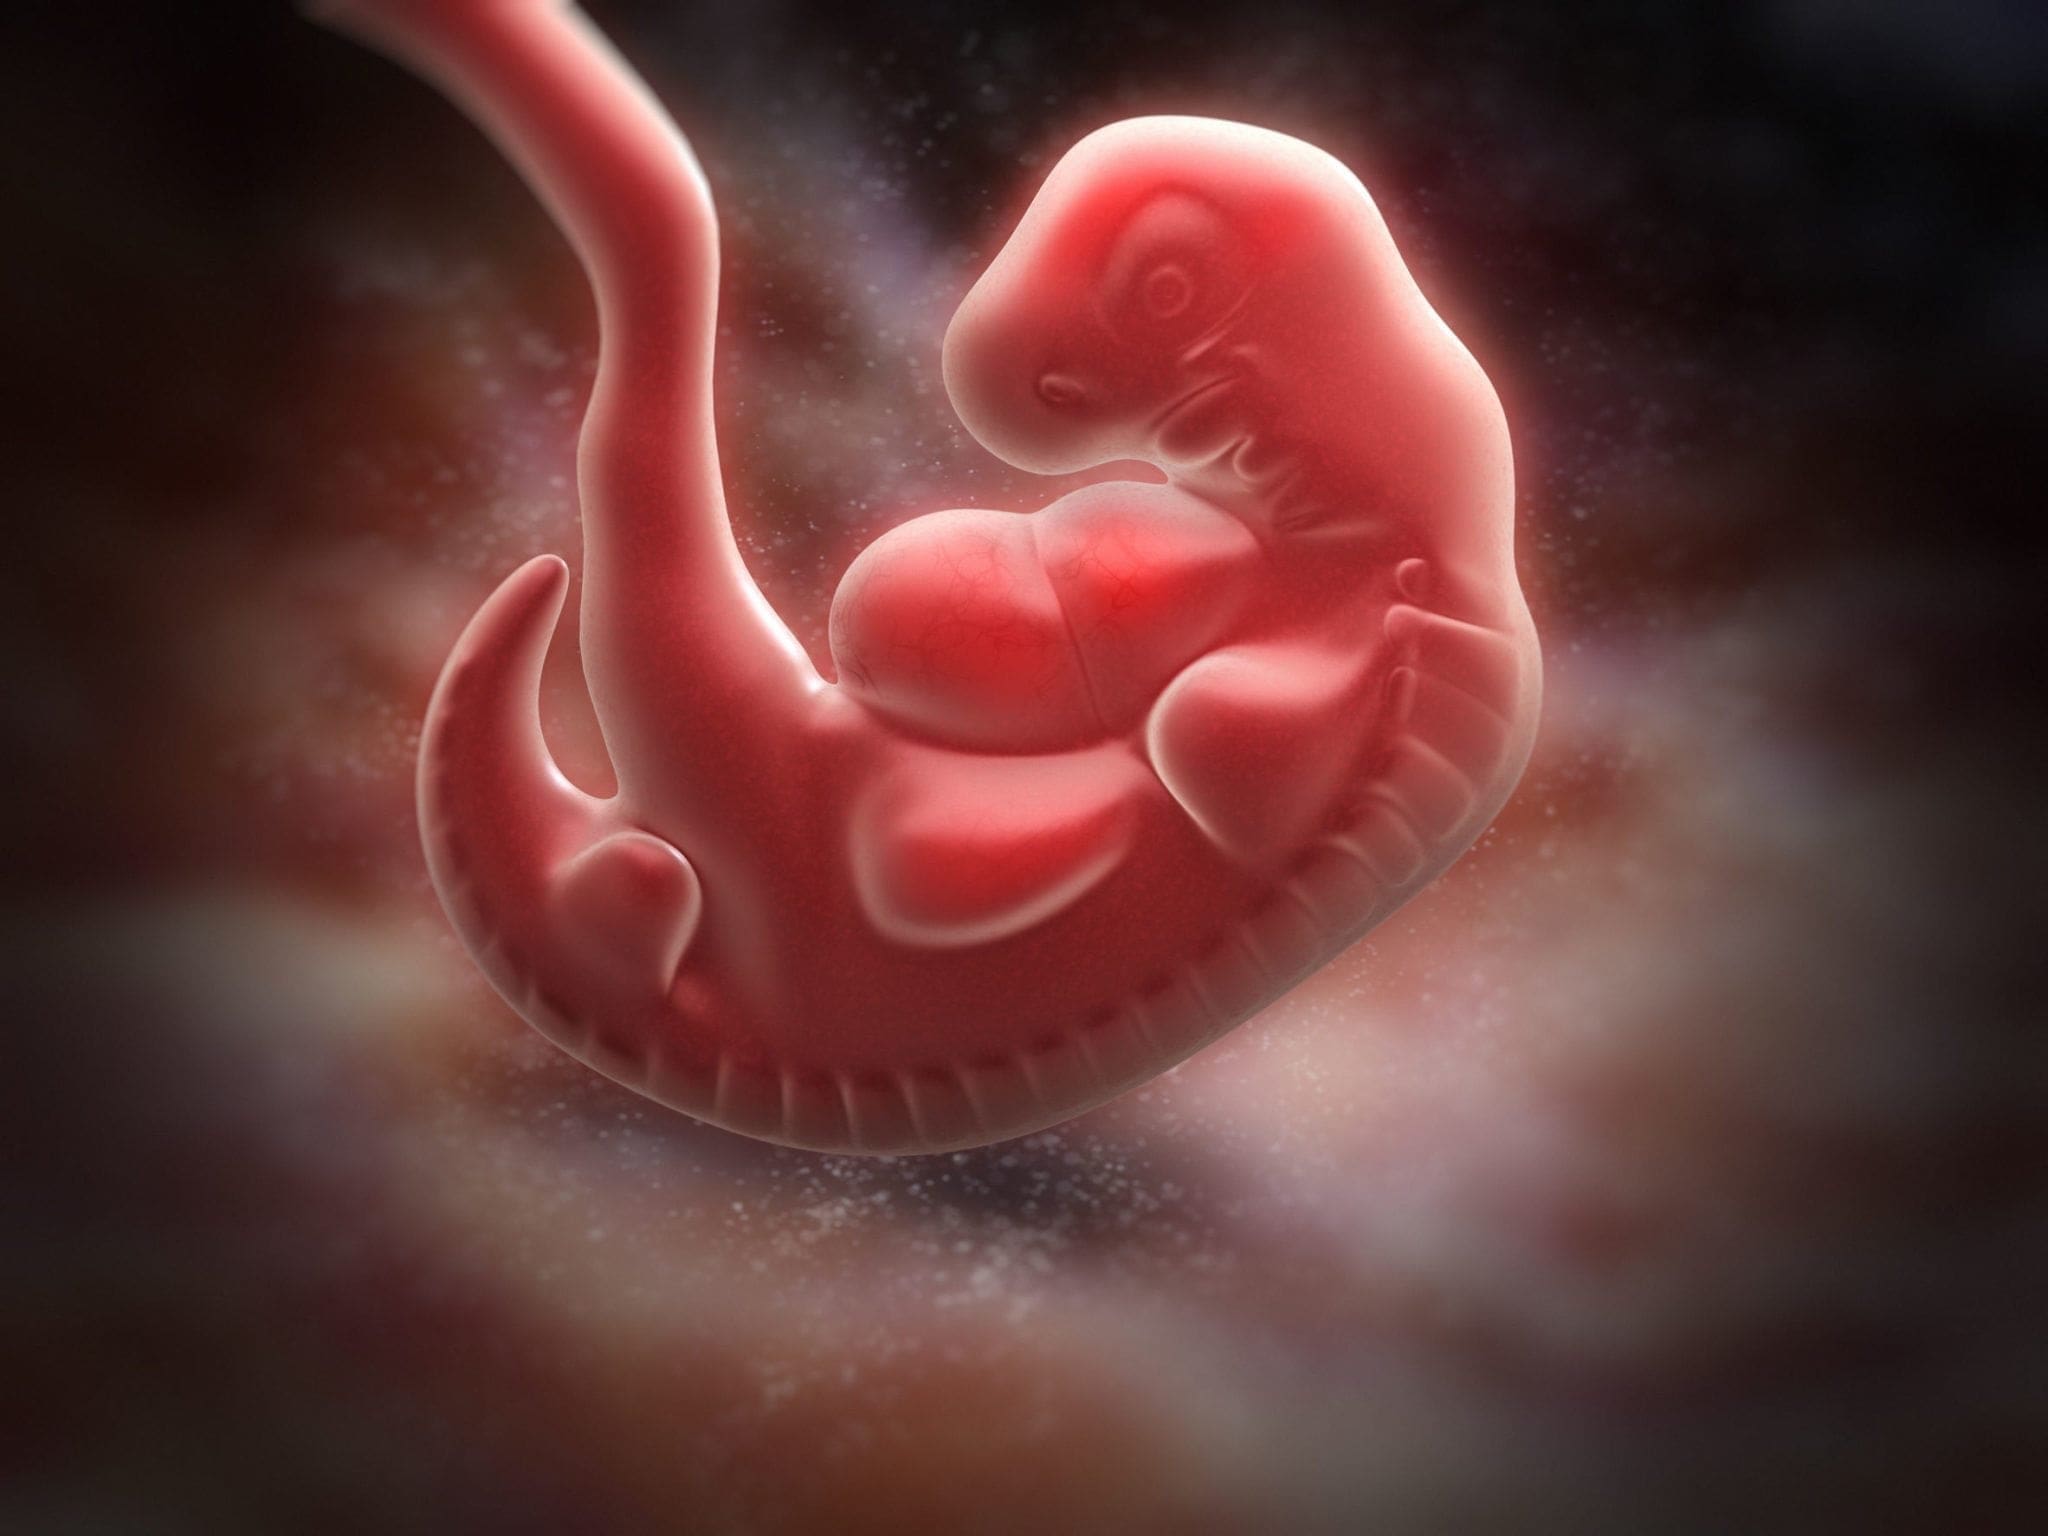 Development Of The Baby In The First Trimester